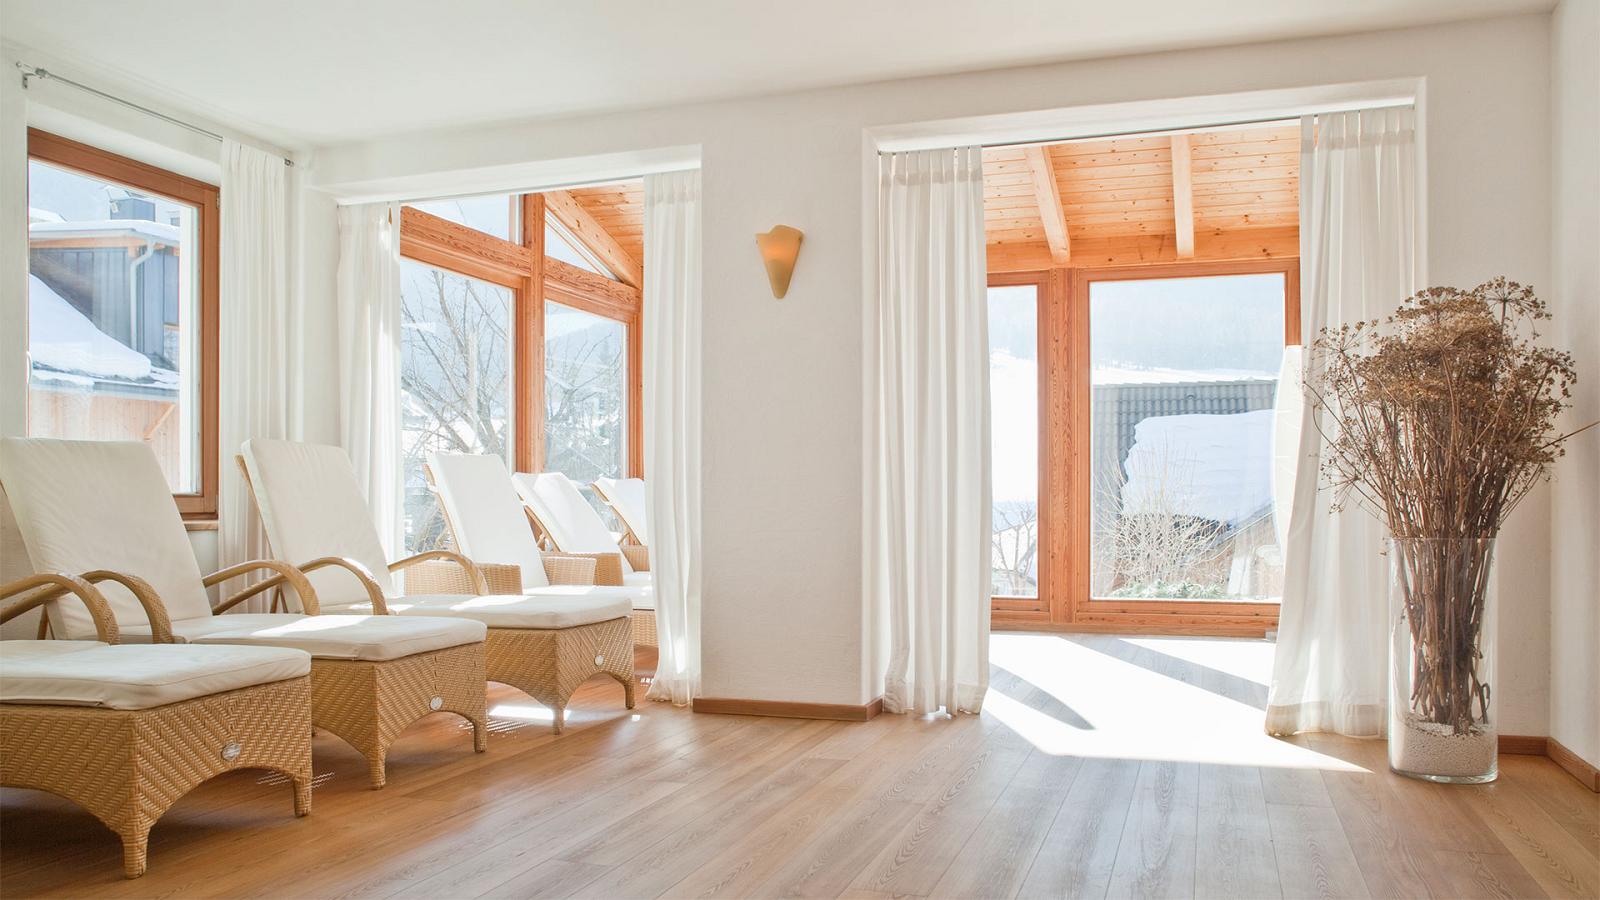 The elegant wellness area of the Hotel Strobl with wicker beds, white curtains and large bright windows